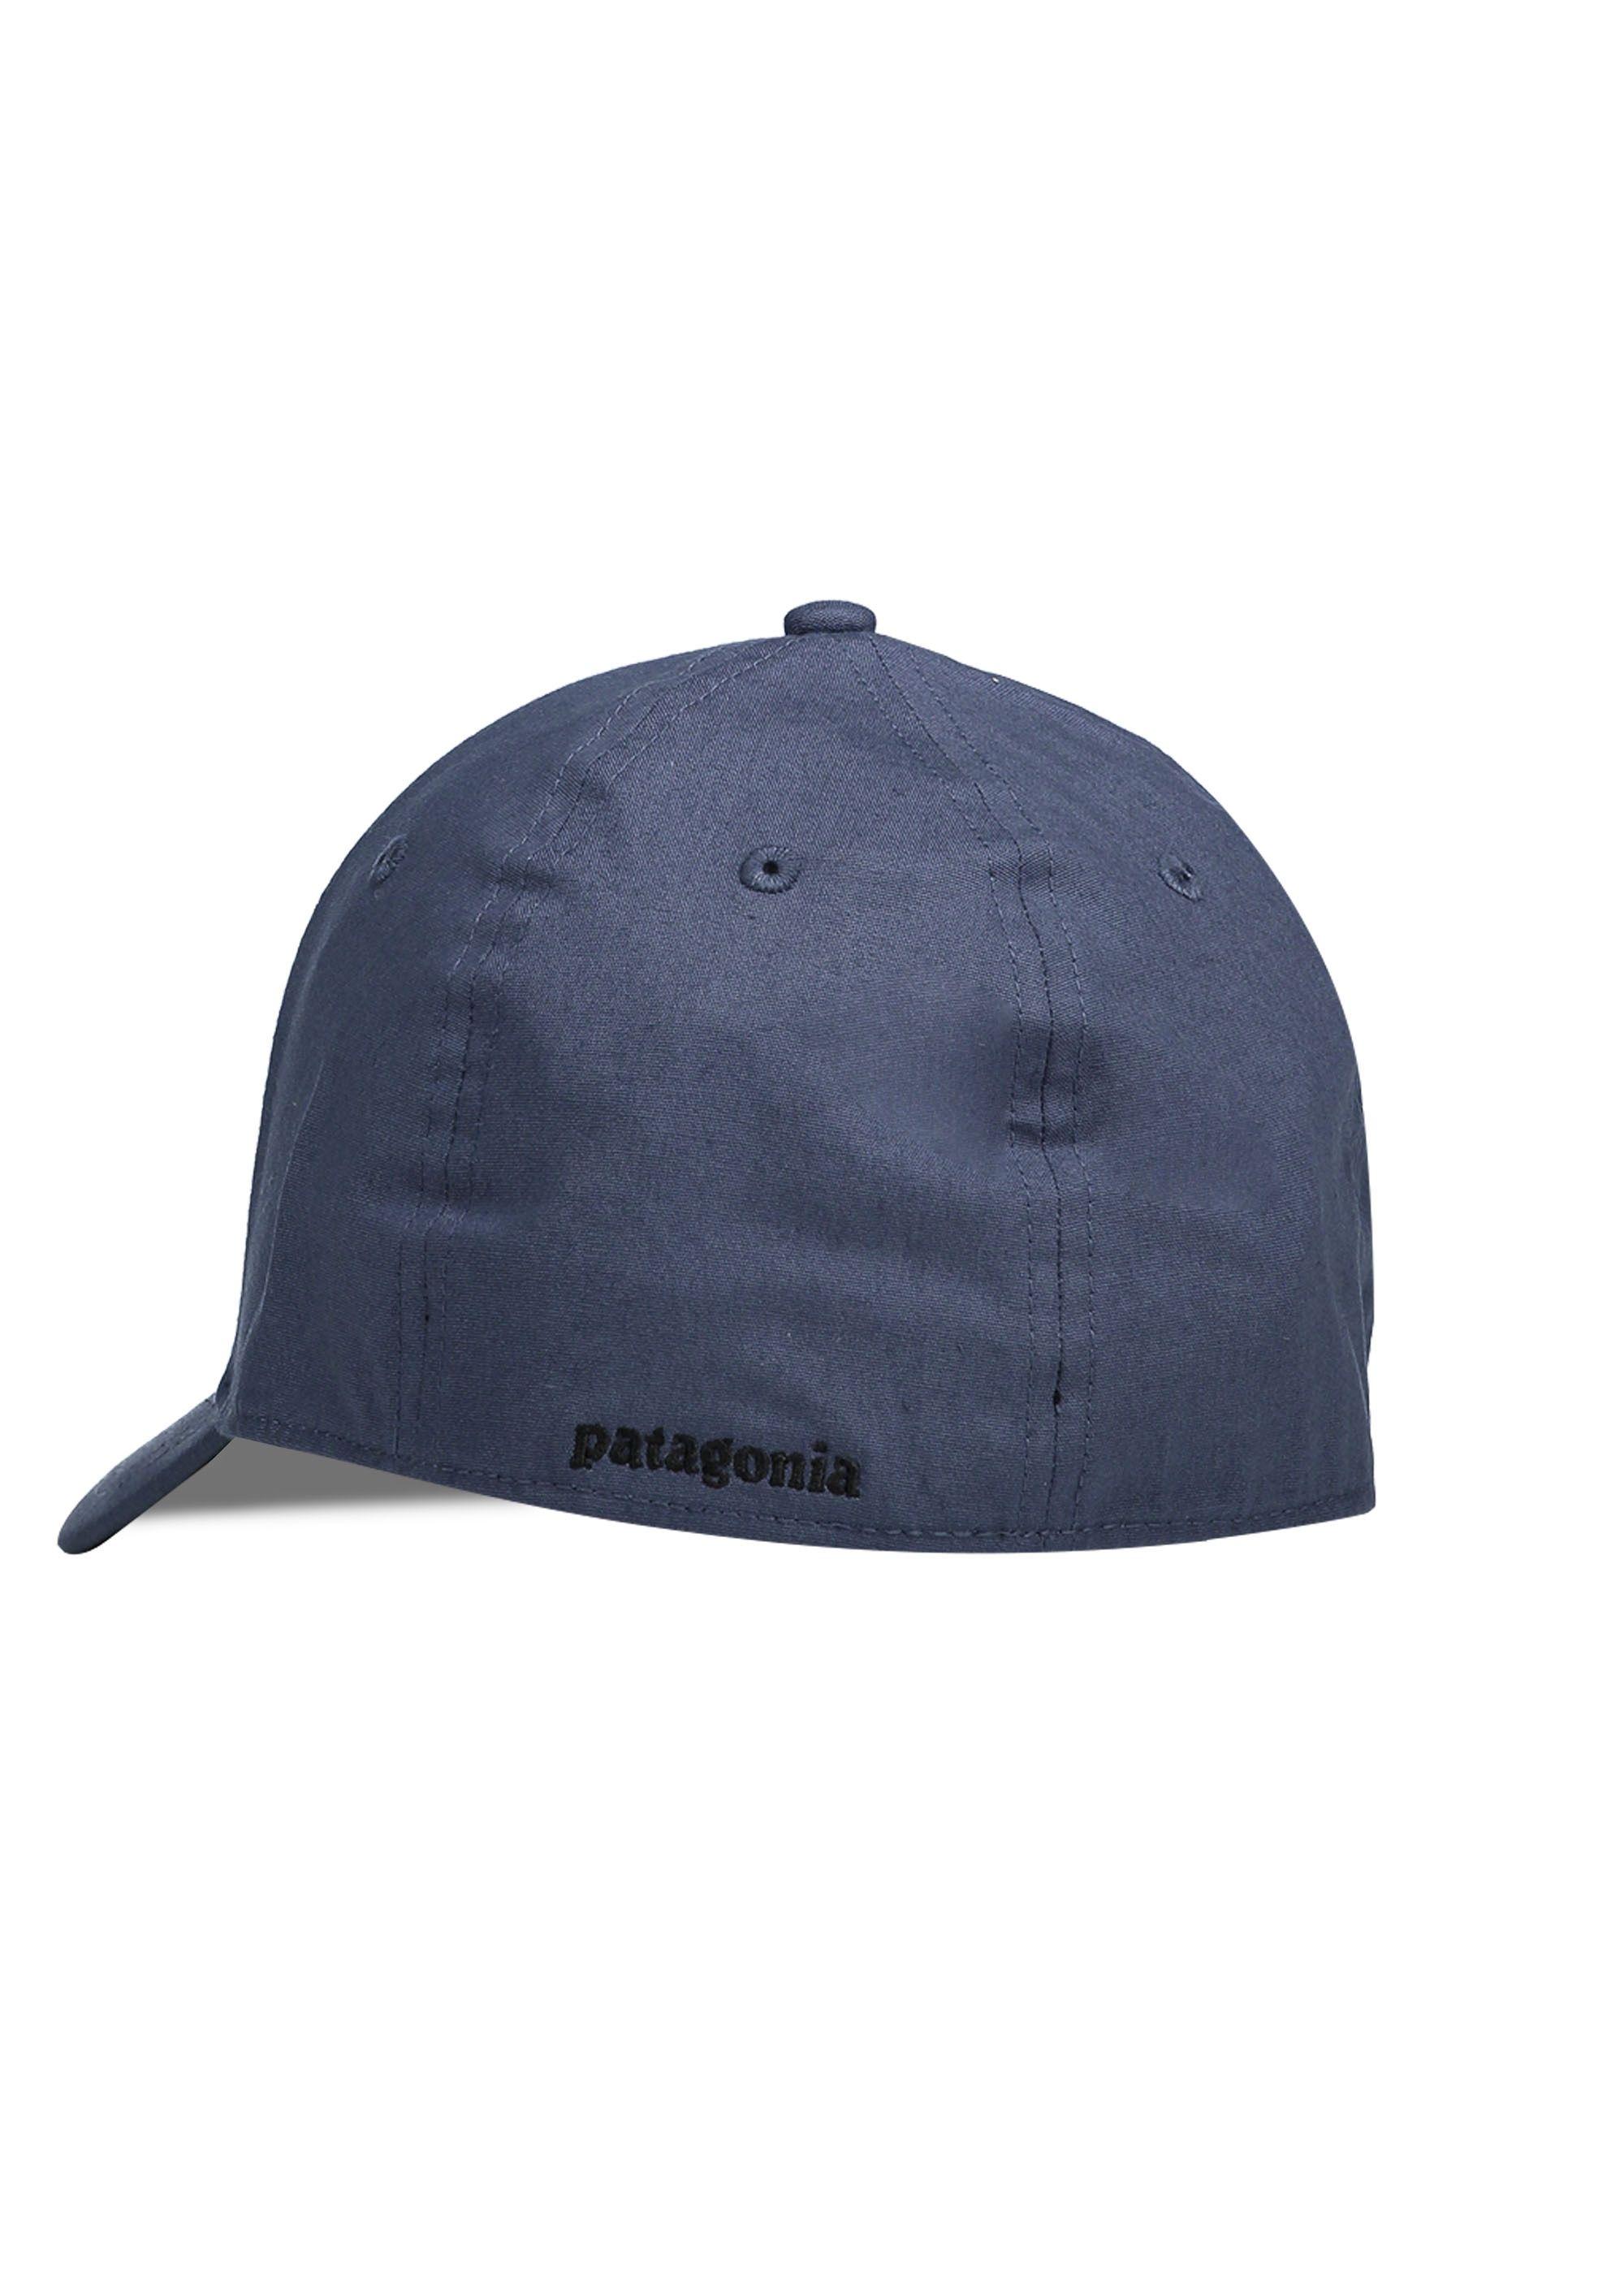 Who Has a Blue P Logo - Patagonia P 6 Logo Stretch Fit Hat